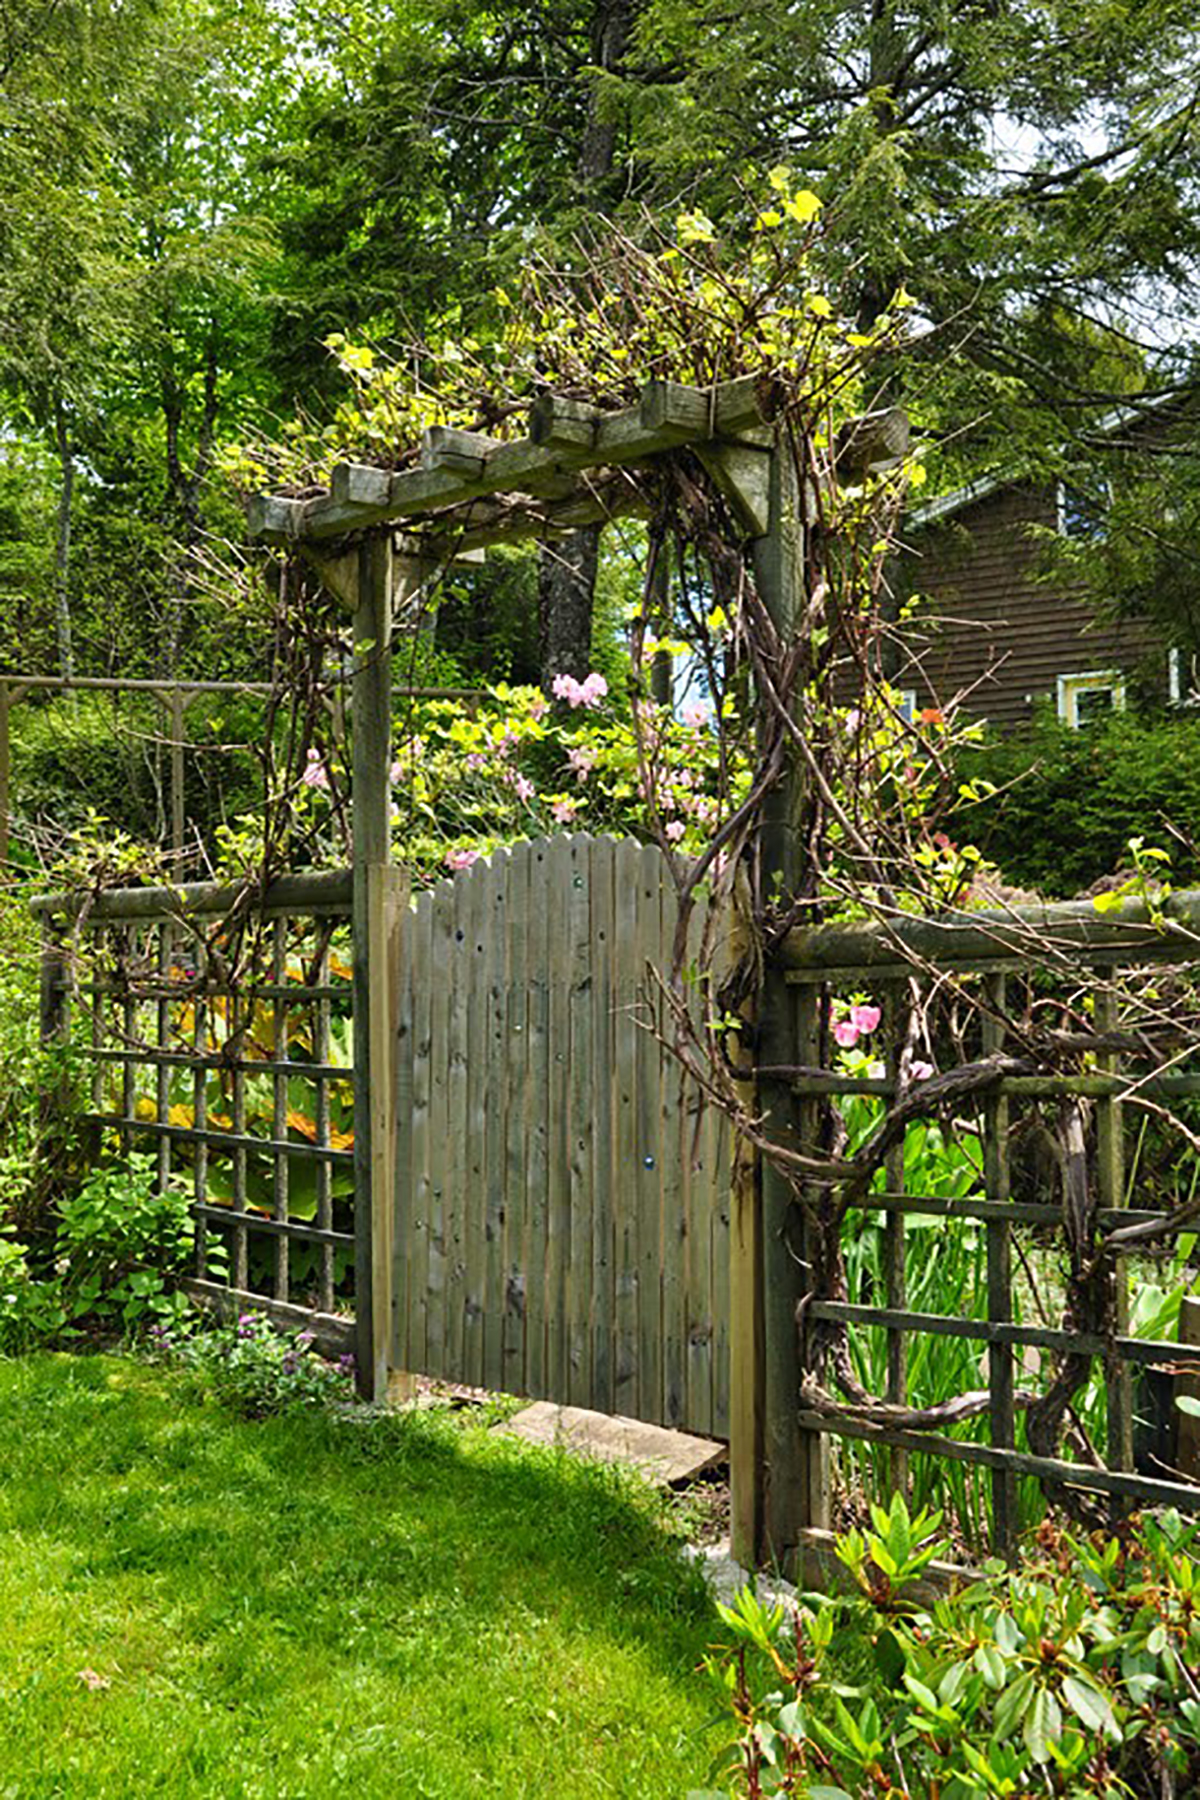 Beautiful And Elegant Rustic Garden Gate Ideas You Should Know